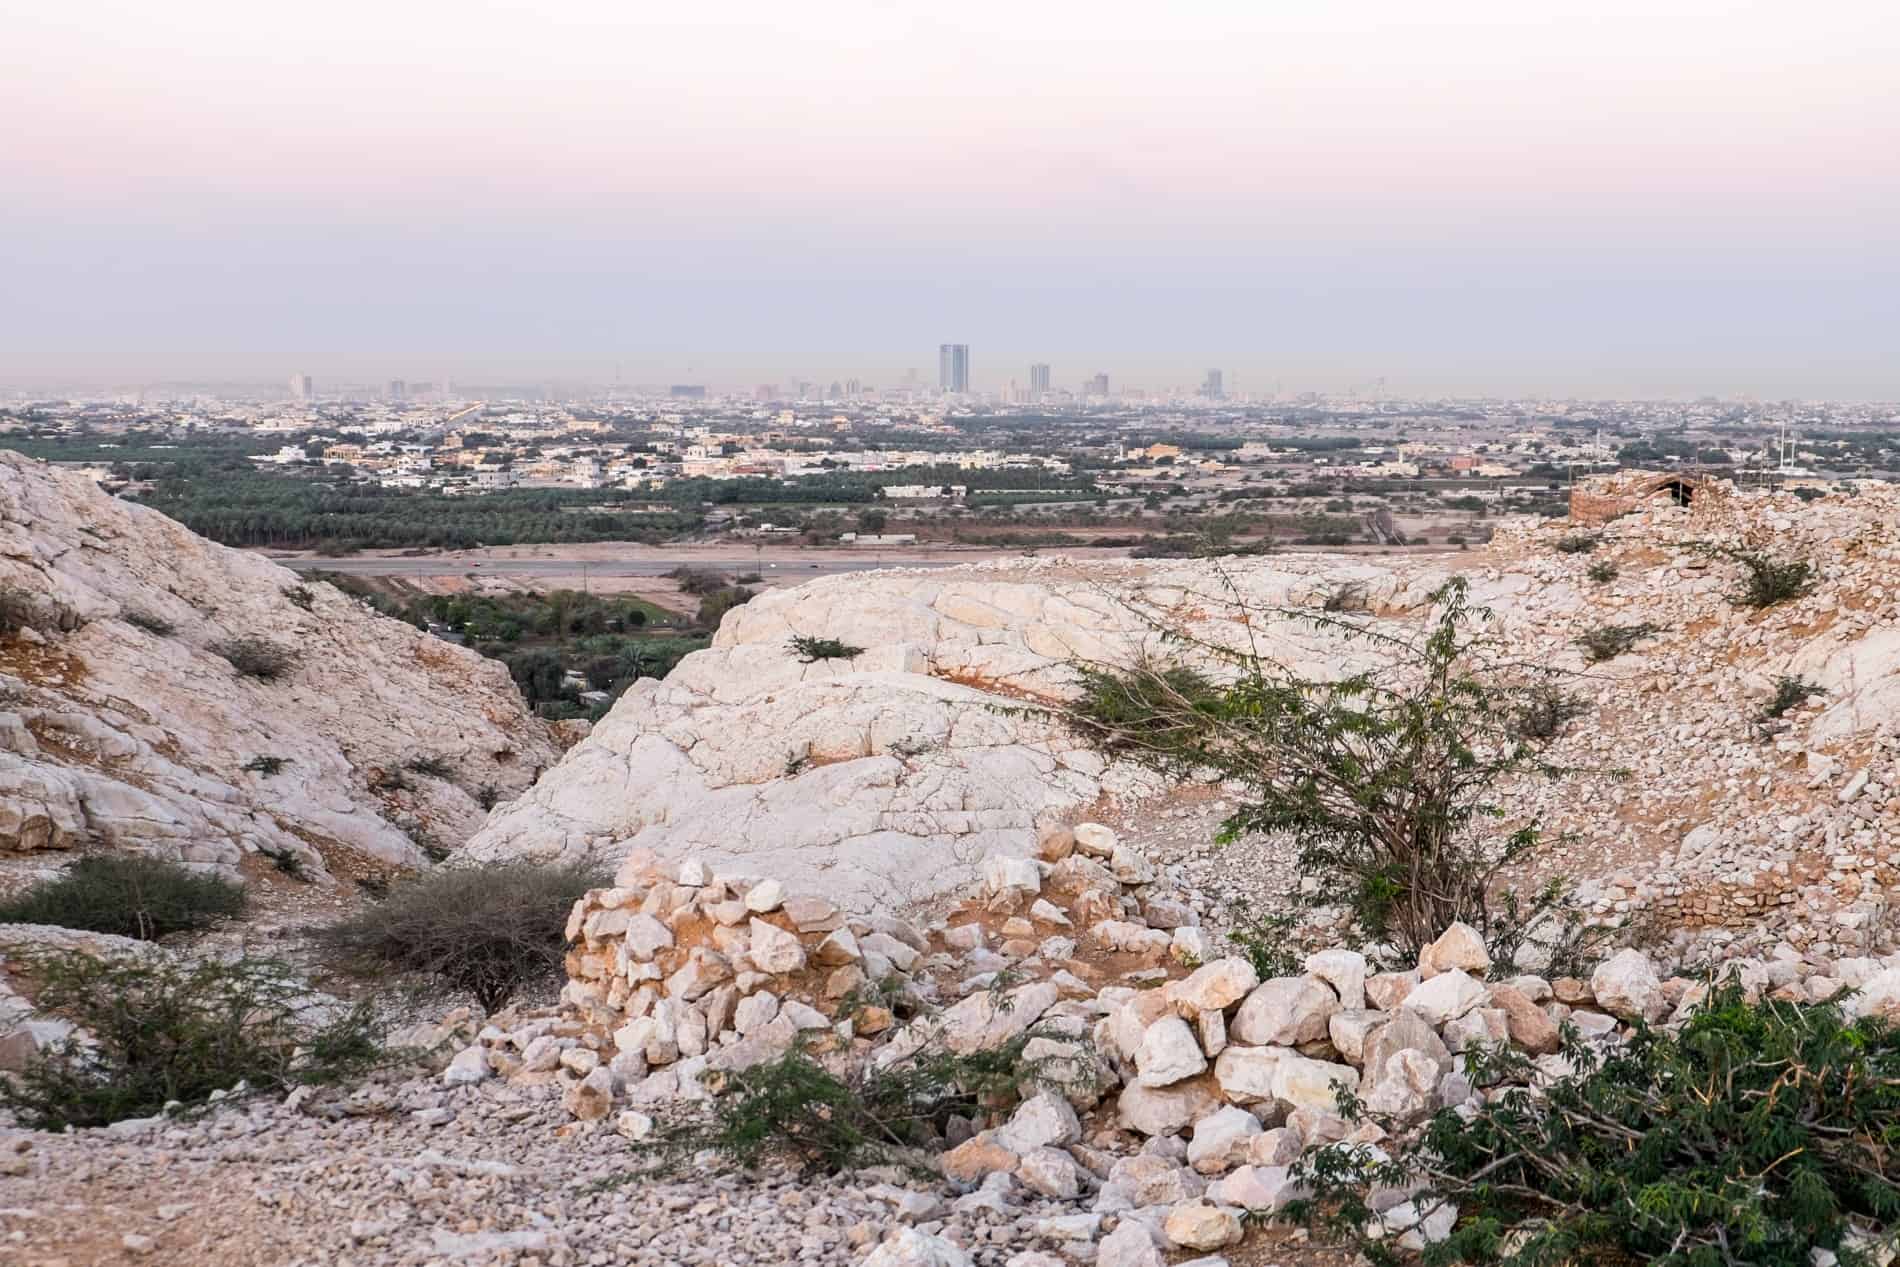 Views to Ras Al Khaimah city from atop a rocky mound in the Jebel Jais mountains. 